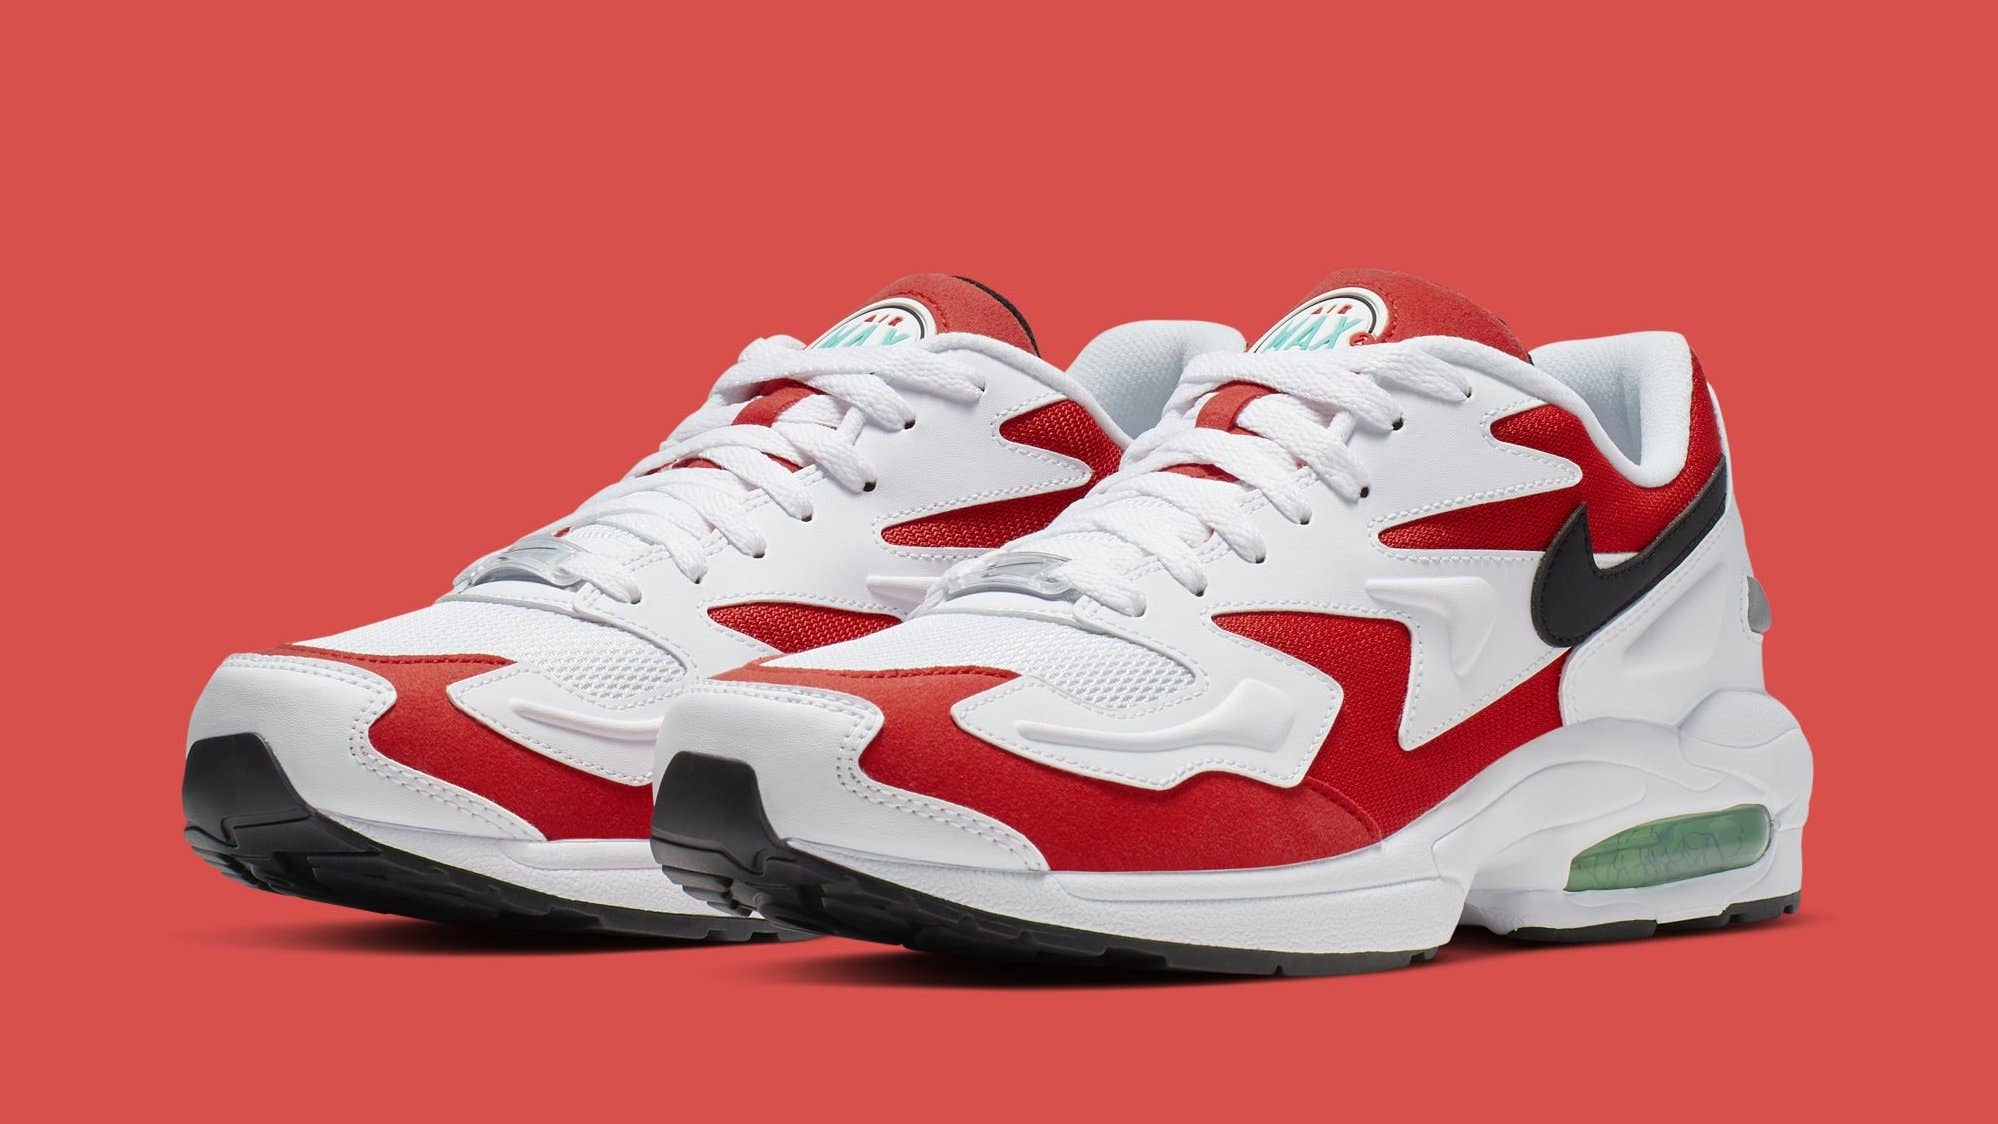 Registratie ZuidAmerika Modderig Nike Is Bringing Back Another OG Colorway of the Air Max2 Light | Complex